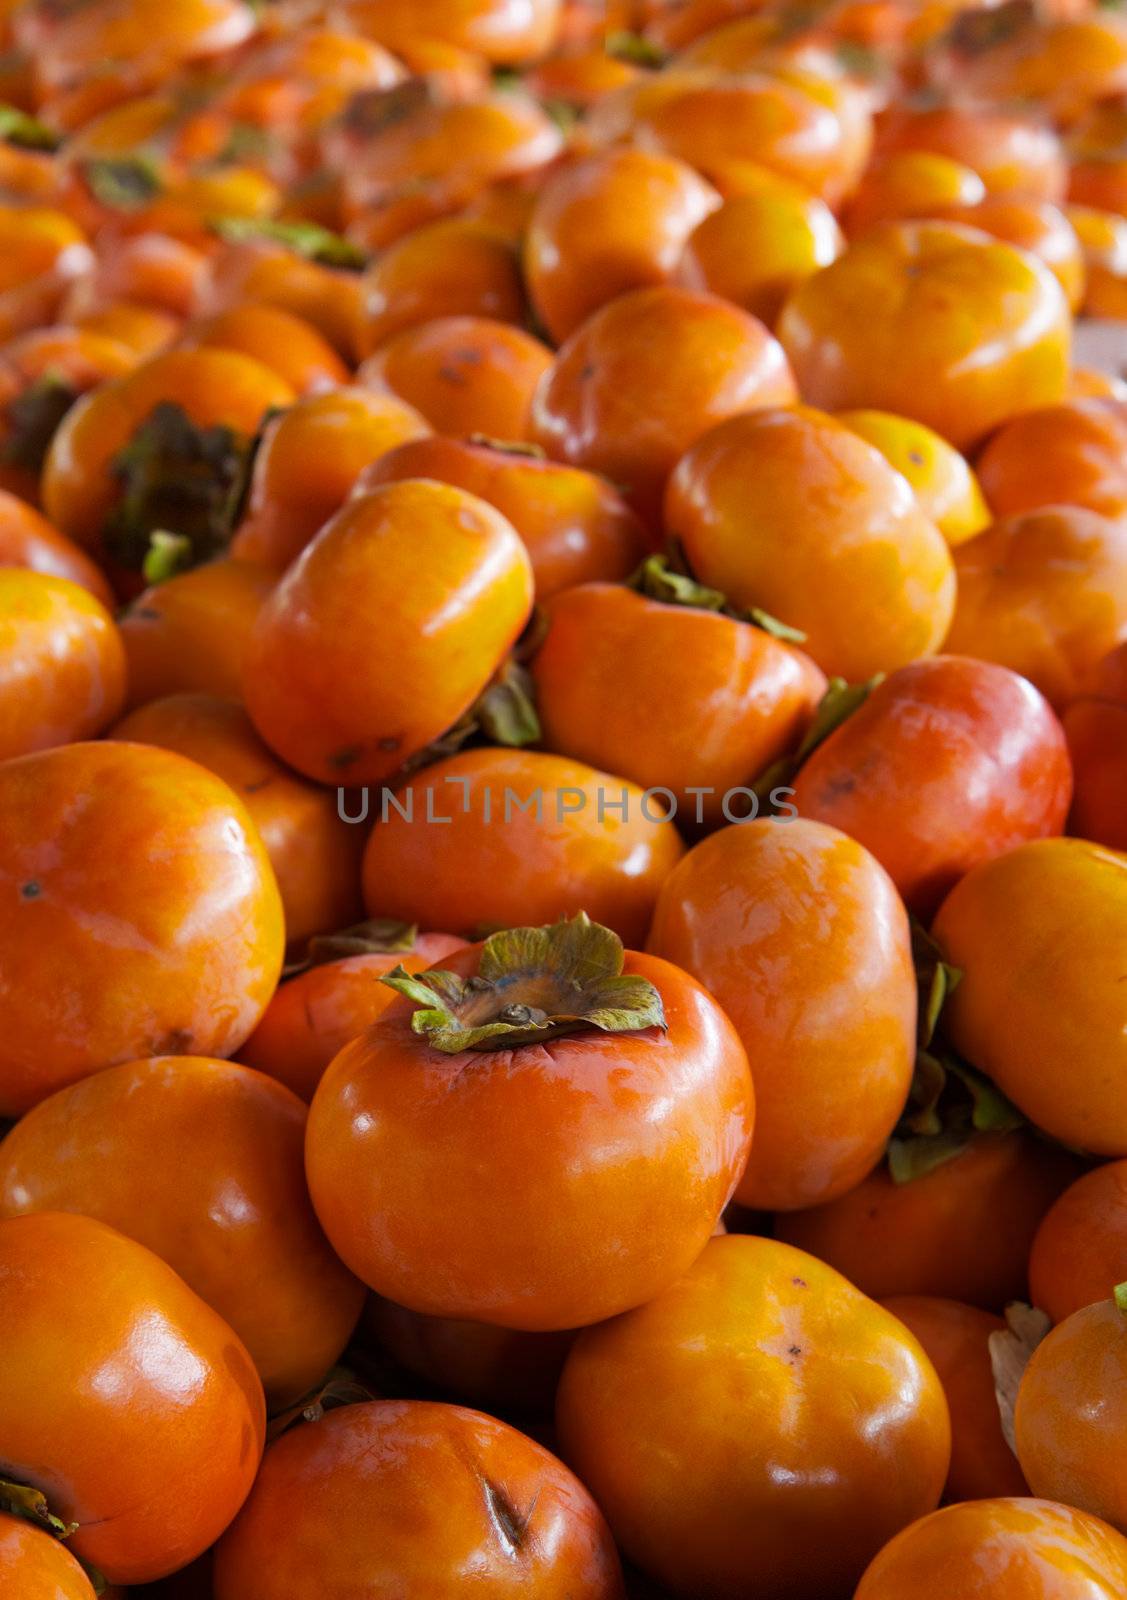 Pile of orange persimmons at the farmers market with focus on one fruit.